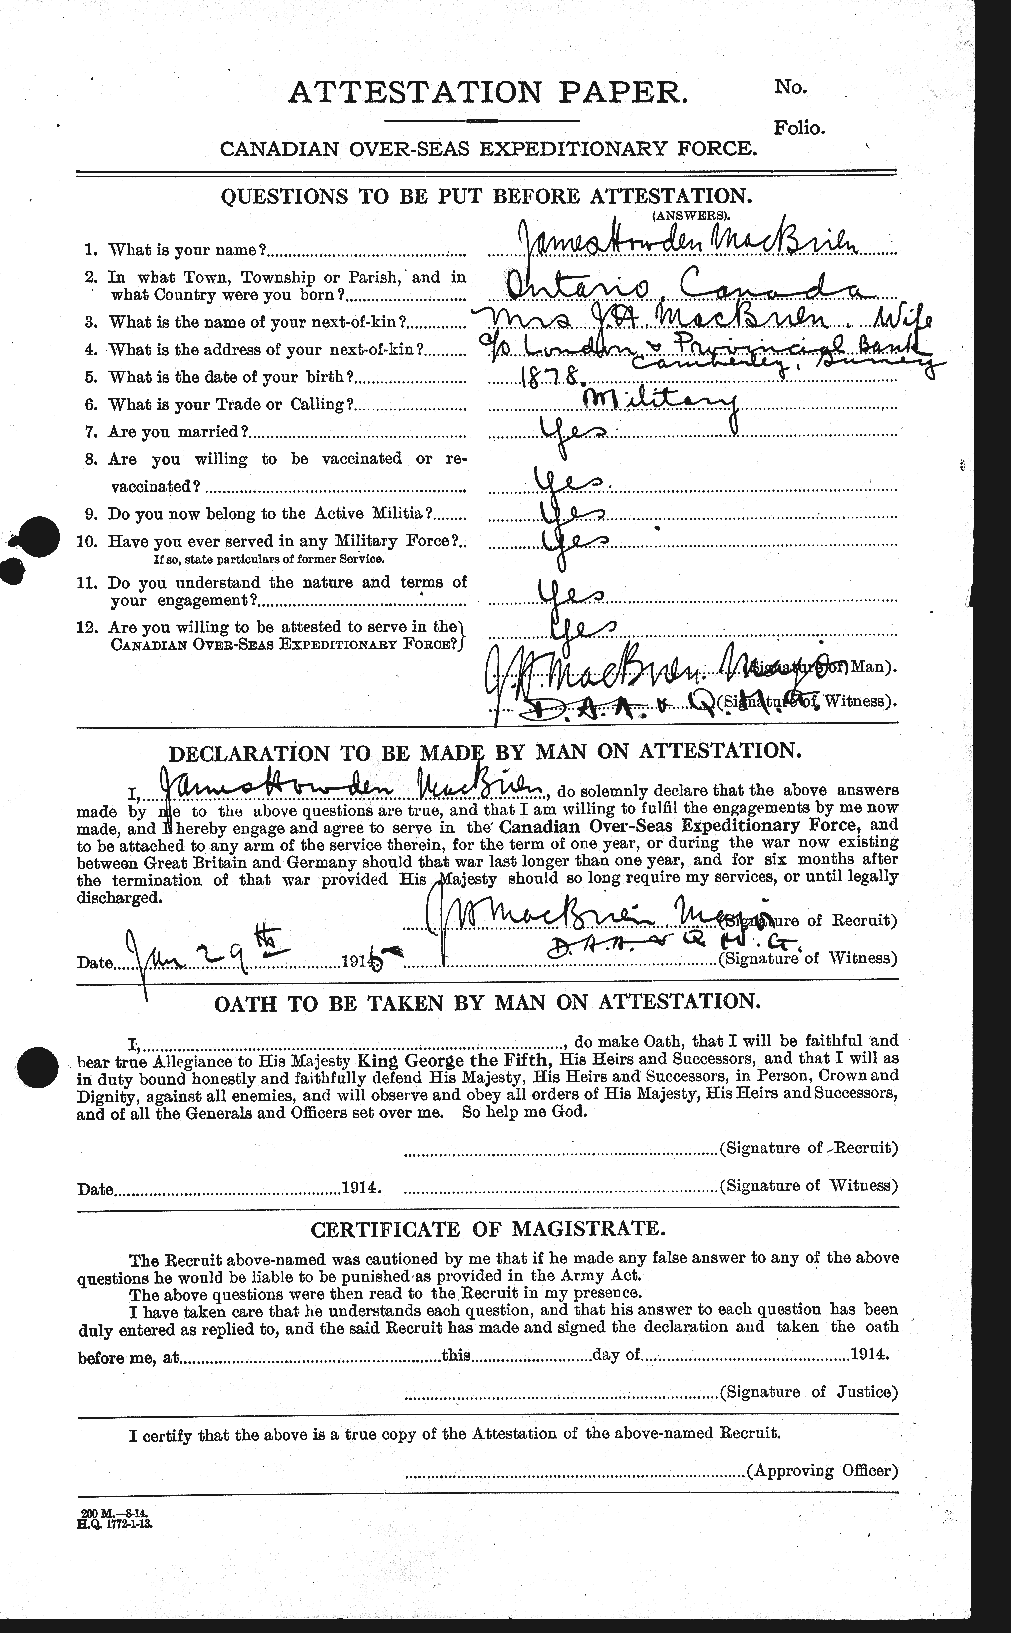 Personnel Records of the First World War - CEF 131799a